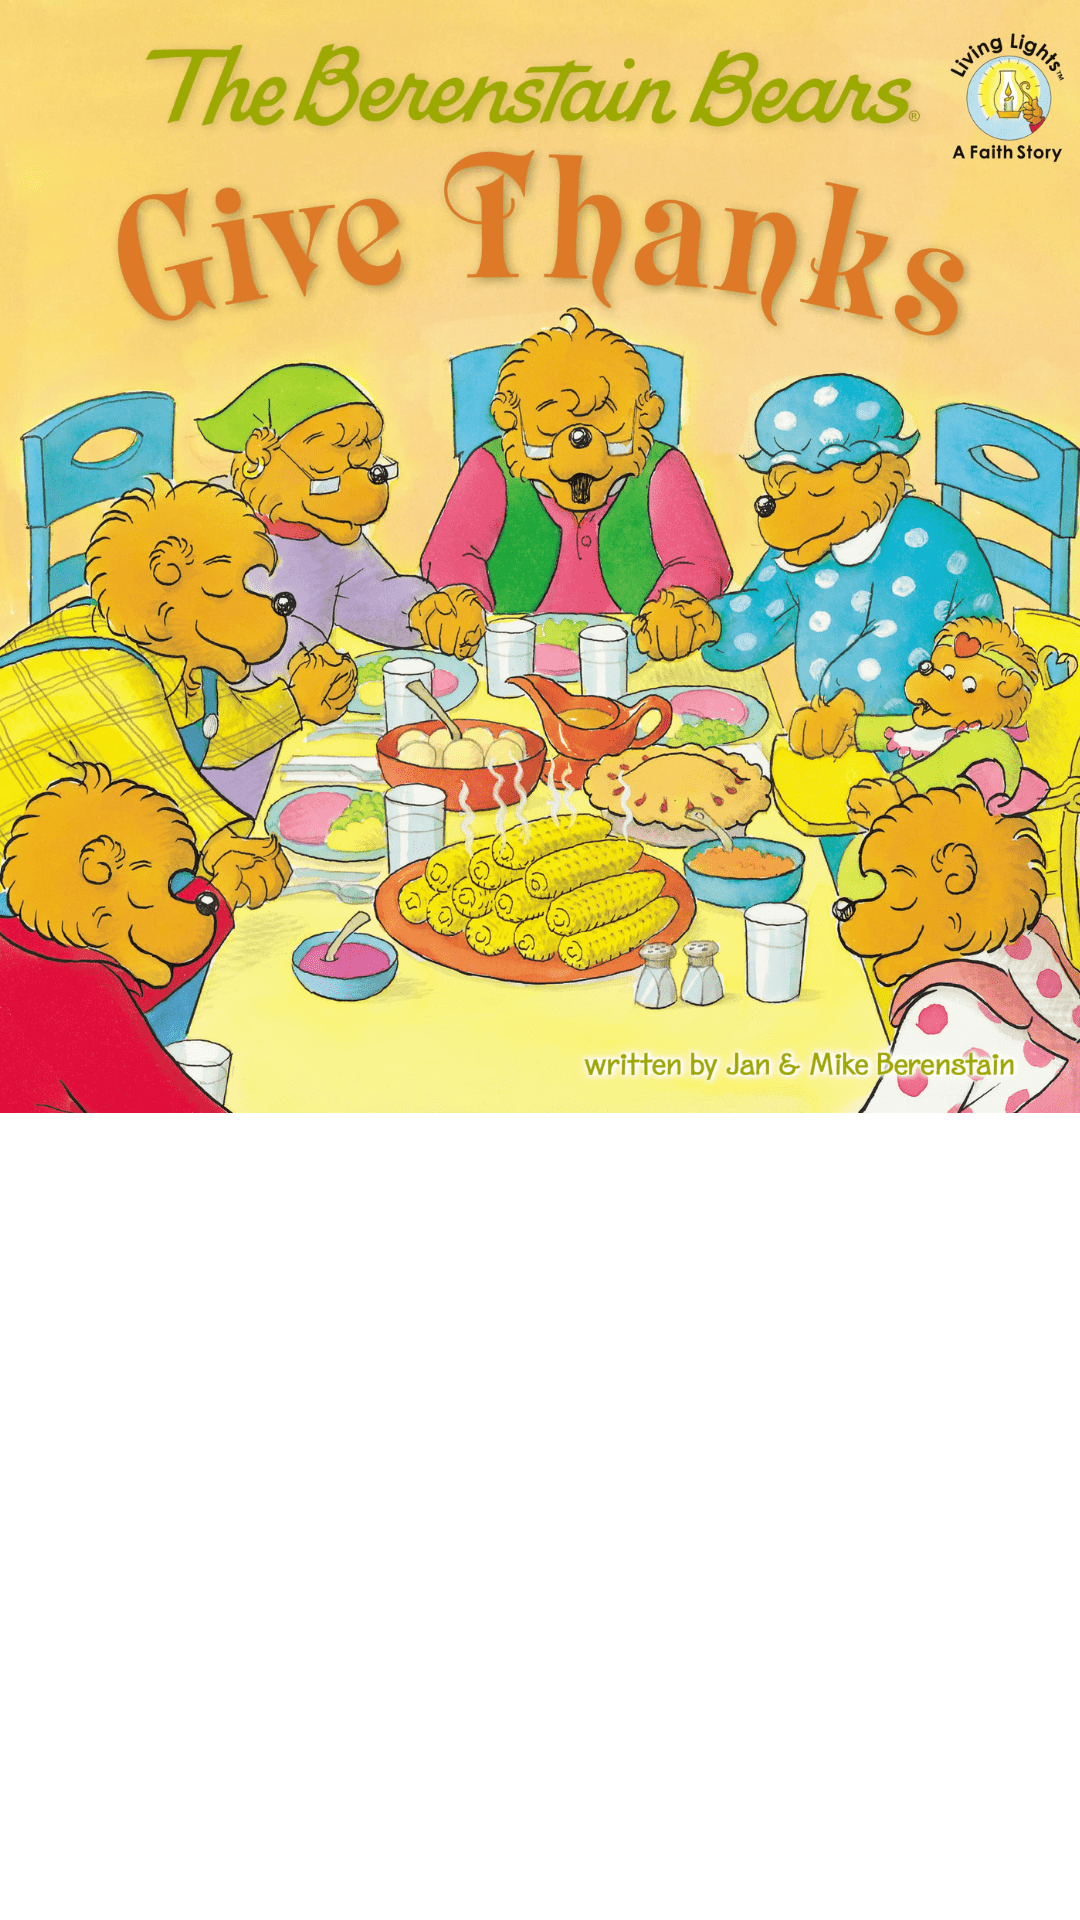 The Berenstain Bears: Give Thanks